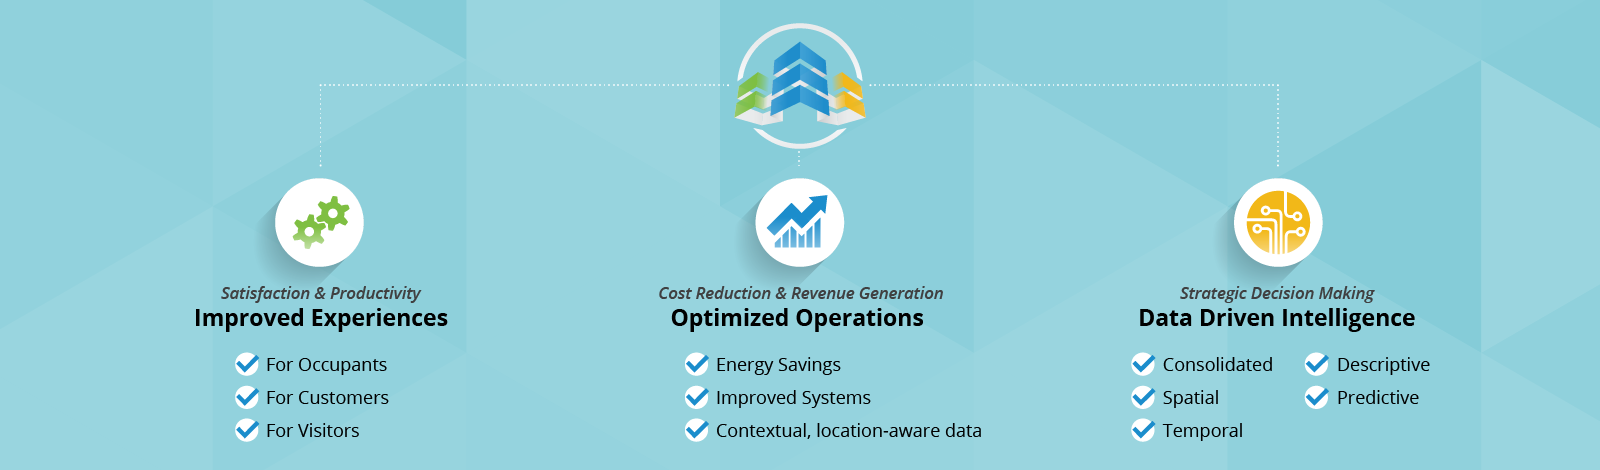 Illustration highlighting benefits of Improved Experiences, Optimized Operations, and Data Driven Intelligence